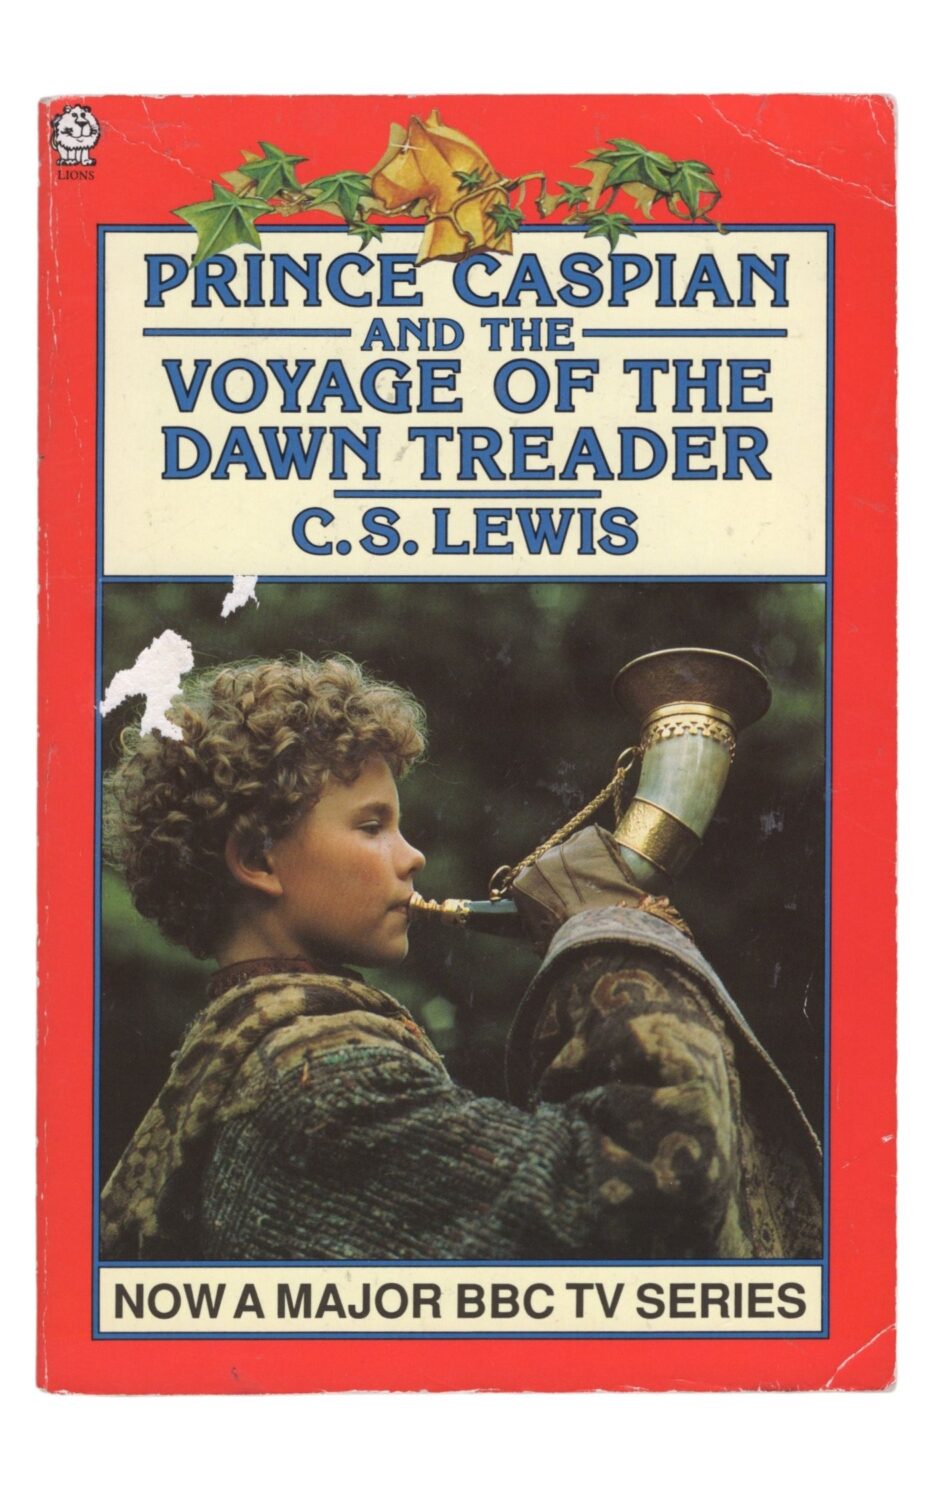 C.S.Lewis - Prince Caspian and the Voyage of the Dawn Treader